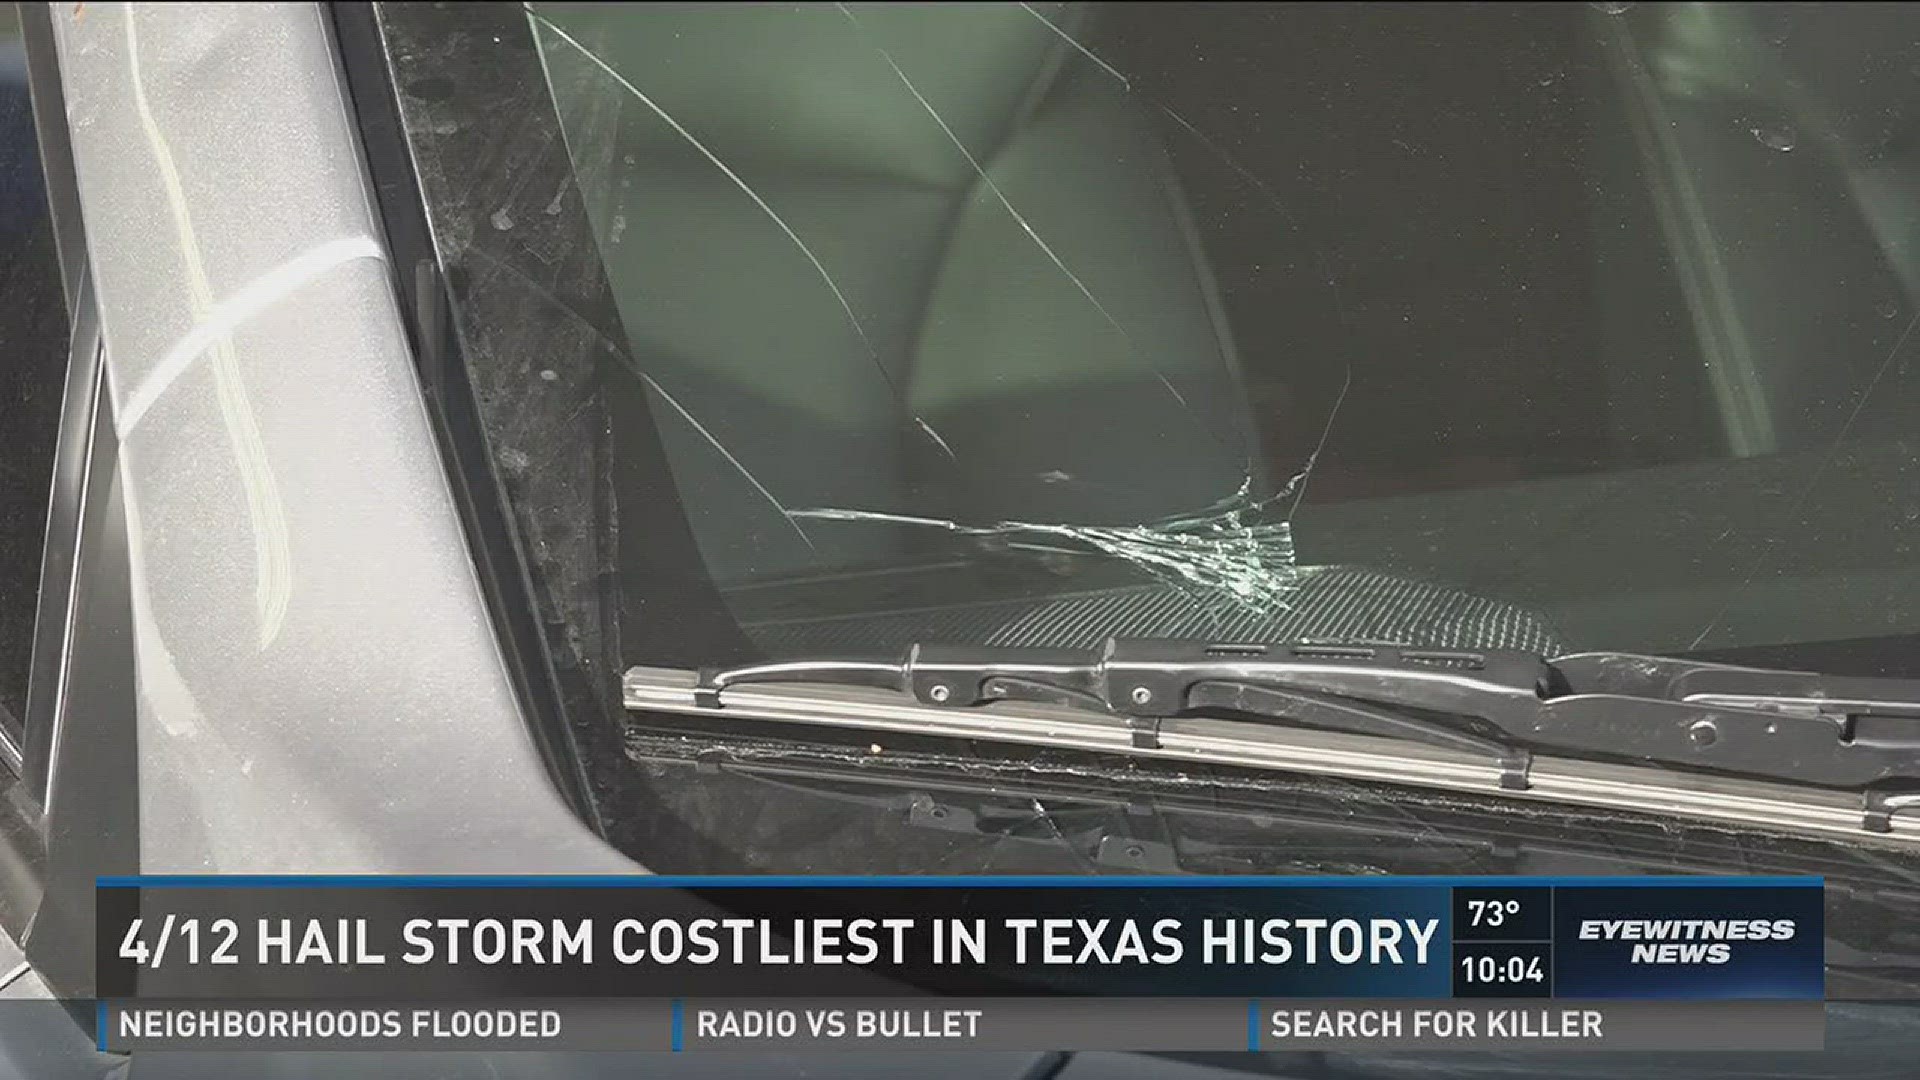 4/12 hail storm costliest in Texas history